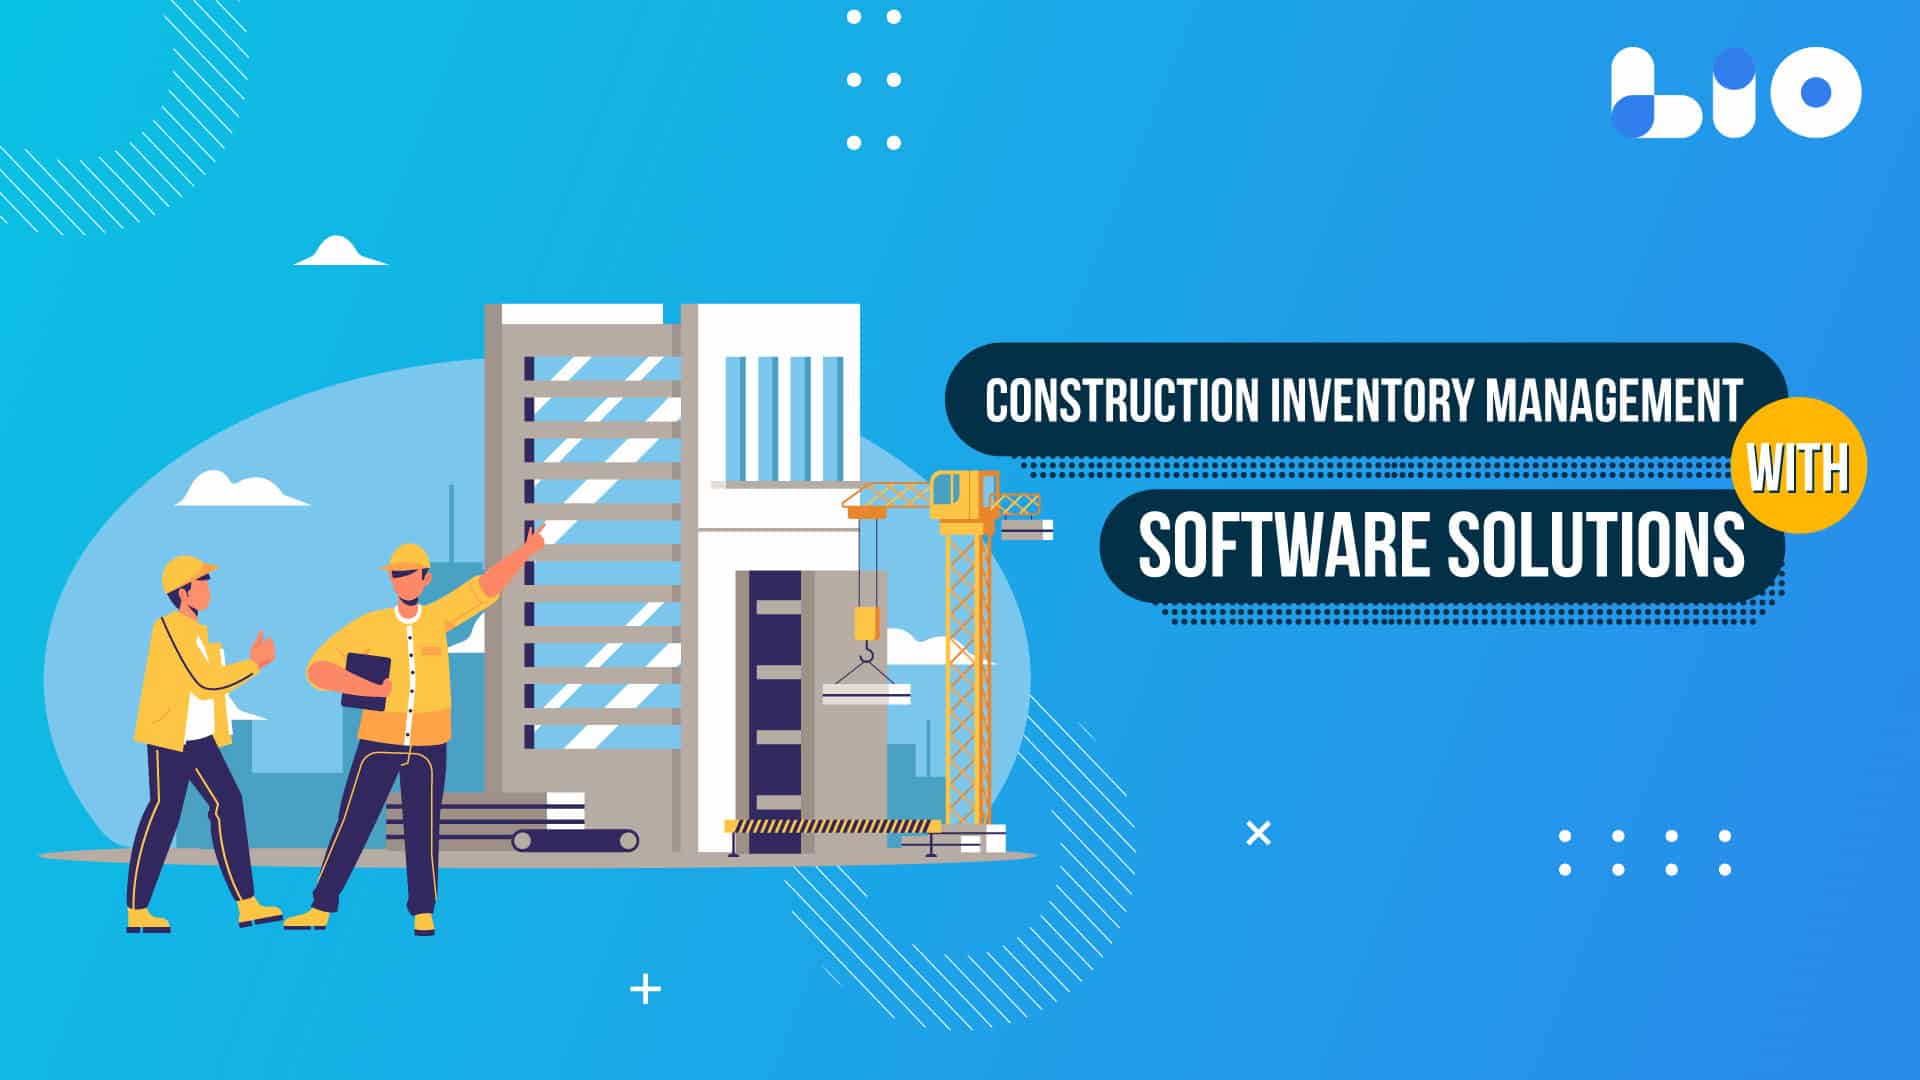 Streamlining Construction Inventory Management with Software Solutions